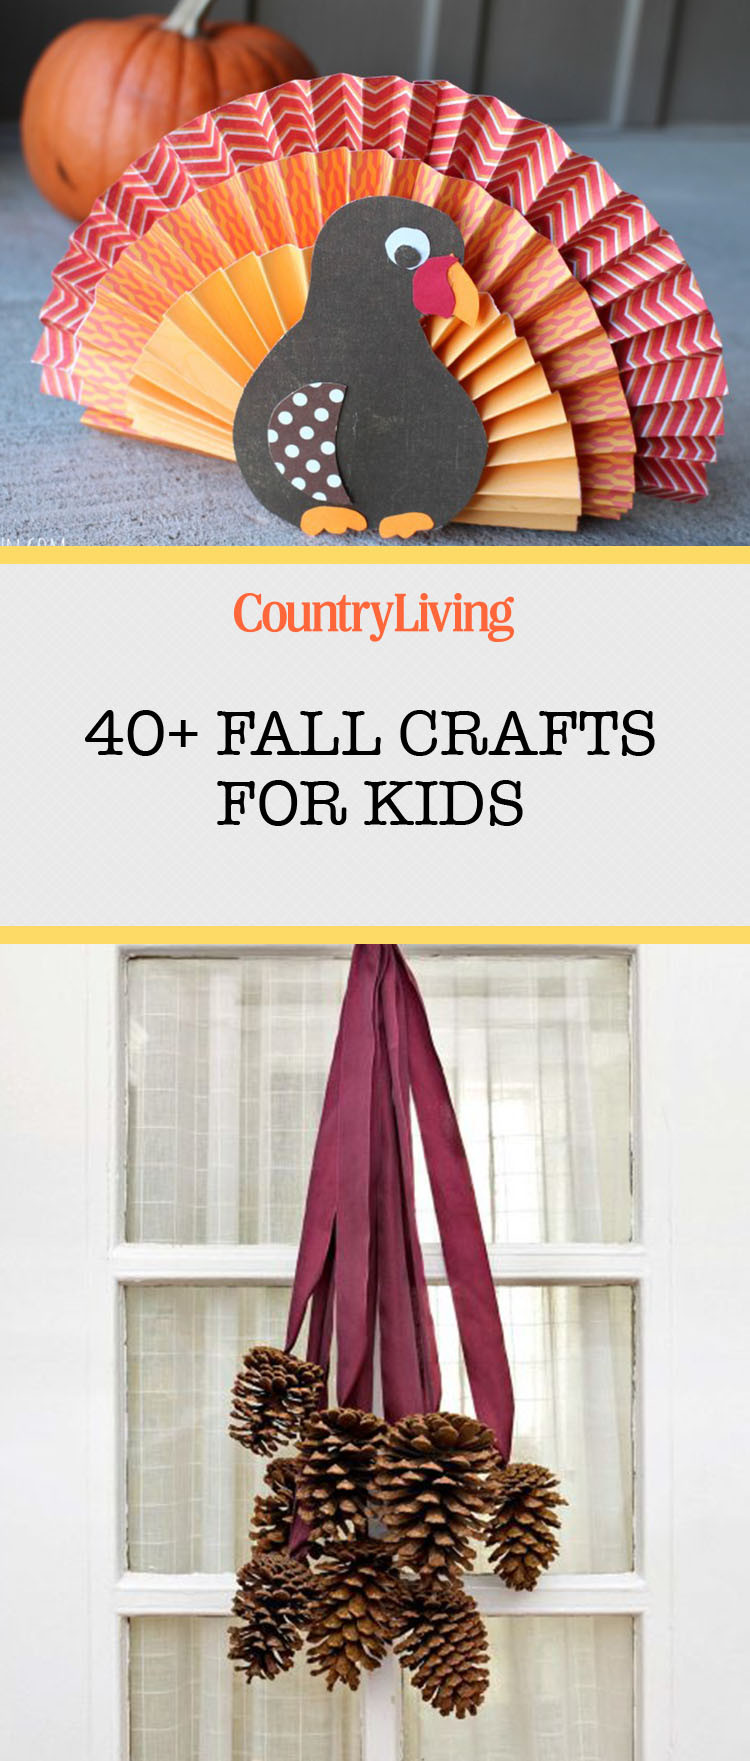 Craft Ideas For Toddlers
 45 Fall Crafts For Kids Fall Activities and Project